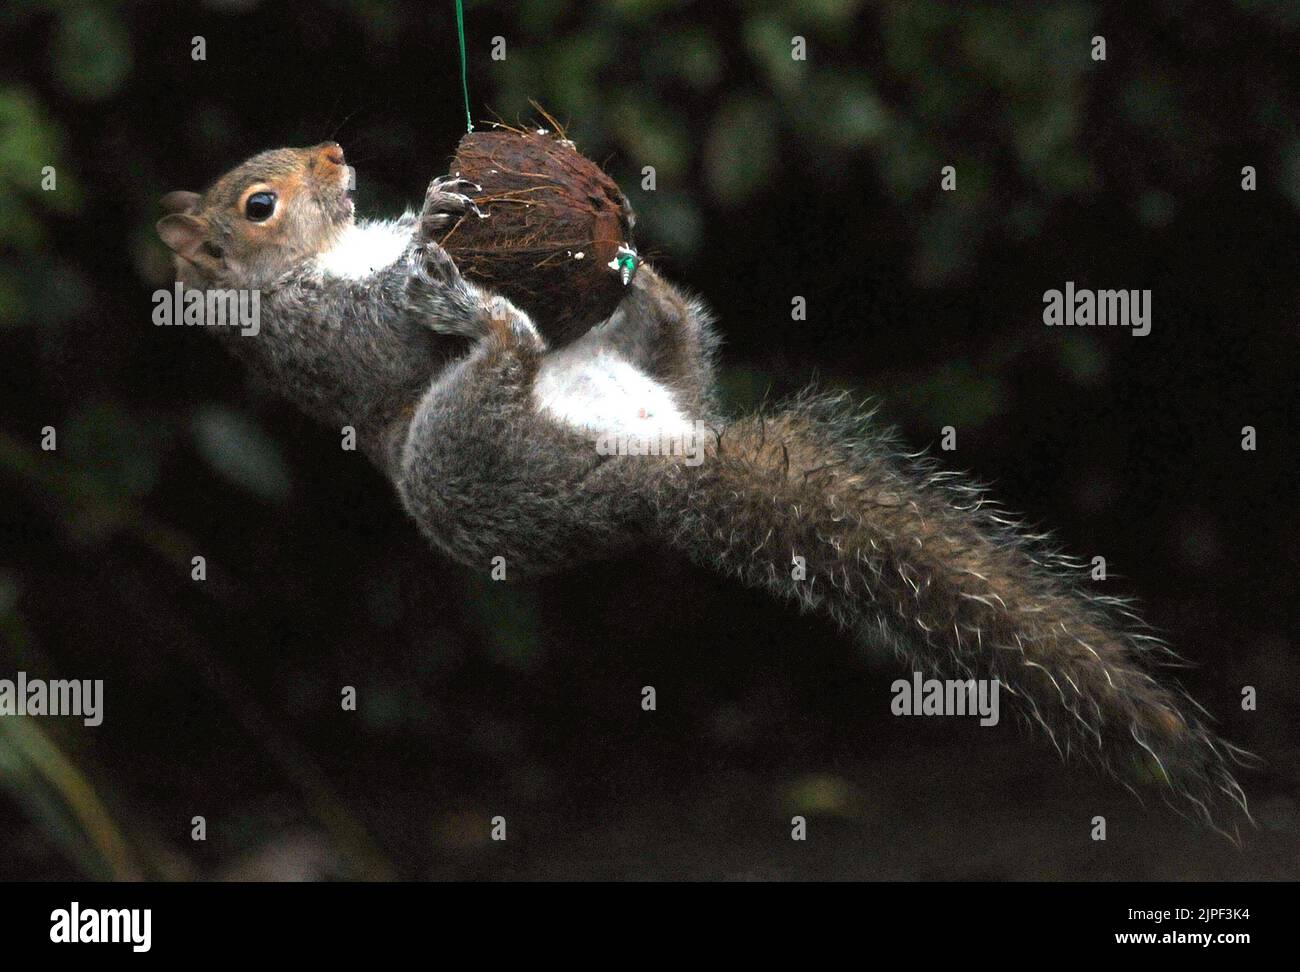 There's more than one way to crack a nut.  A grey squirrel hangs by its toesthen clings  on grimly to the swinging nut and still manages a bite to eat. The acrobatic tufty got the better of Alice Hancock's  scheme to stop squirrels stealing coconuts put out for the birds in  her garden at Hindhead, Surrey. Alice, 38, rigged up a pole and suspended the nut from it out of the squirrels reach but it took just a few minutes for the cheeky grey to work out how to get dinner. Alice said ''I'm determined to get the better of him but its back to the drawing board in my battle of wits with the little p Stock Photo